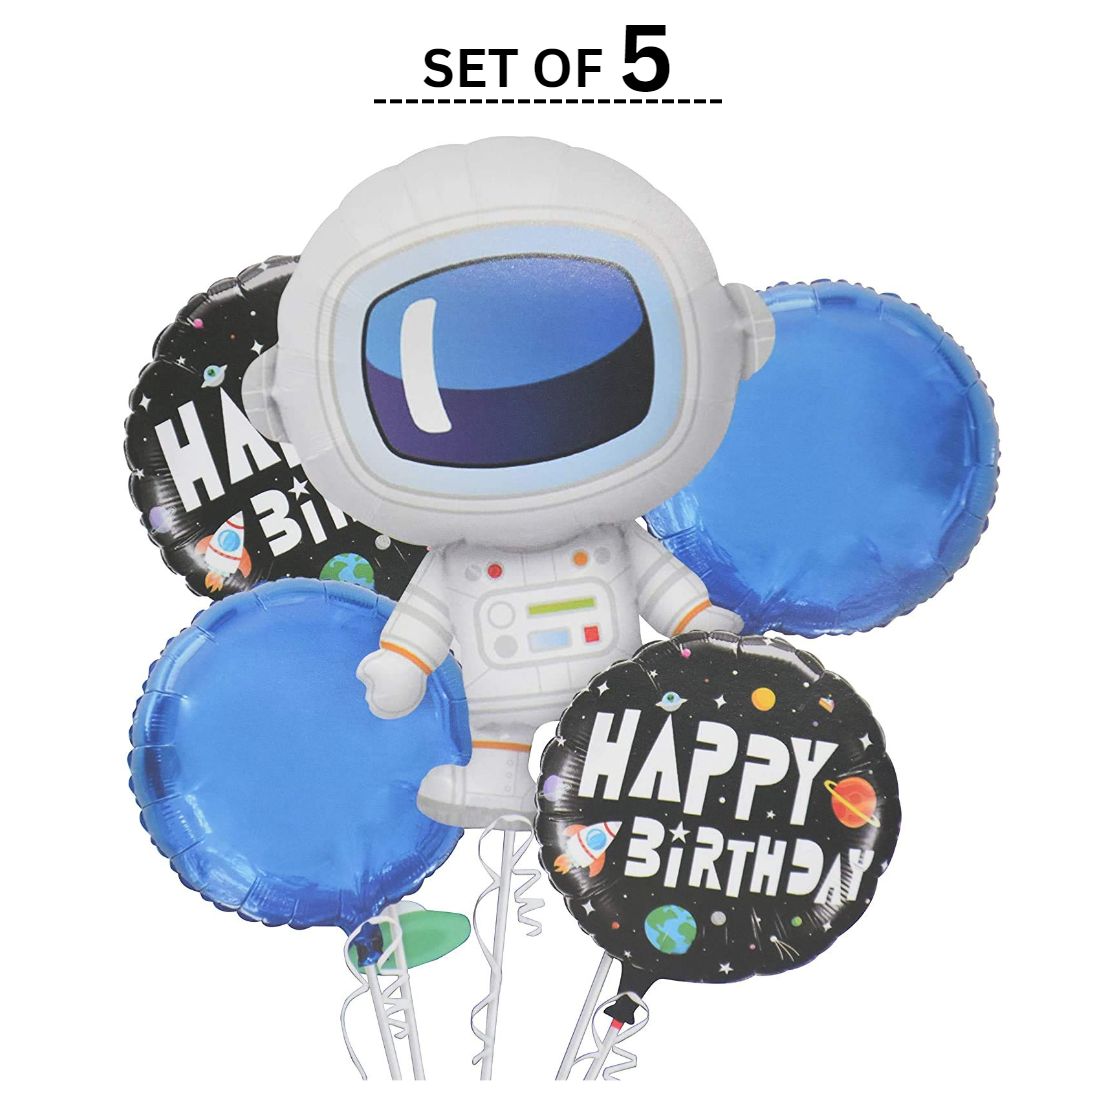 Astronaut Theme Happy Birthday Foil Balloon Set for Space Theme Birthday Party - Pack of 5